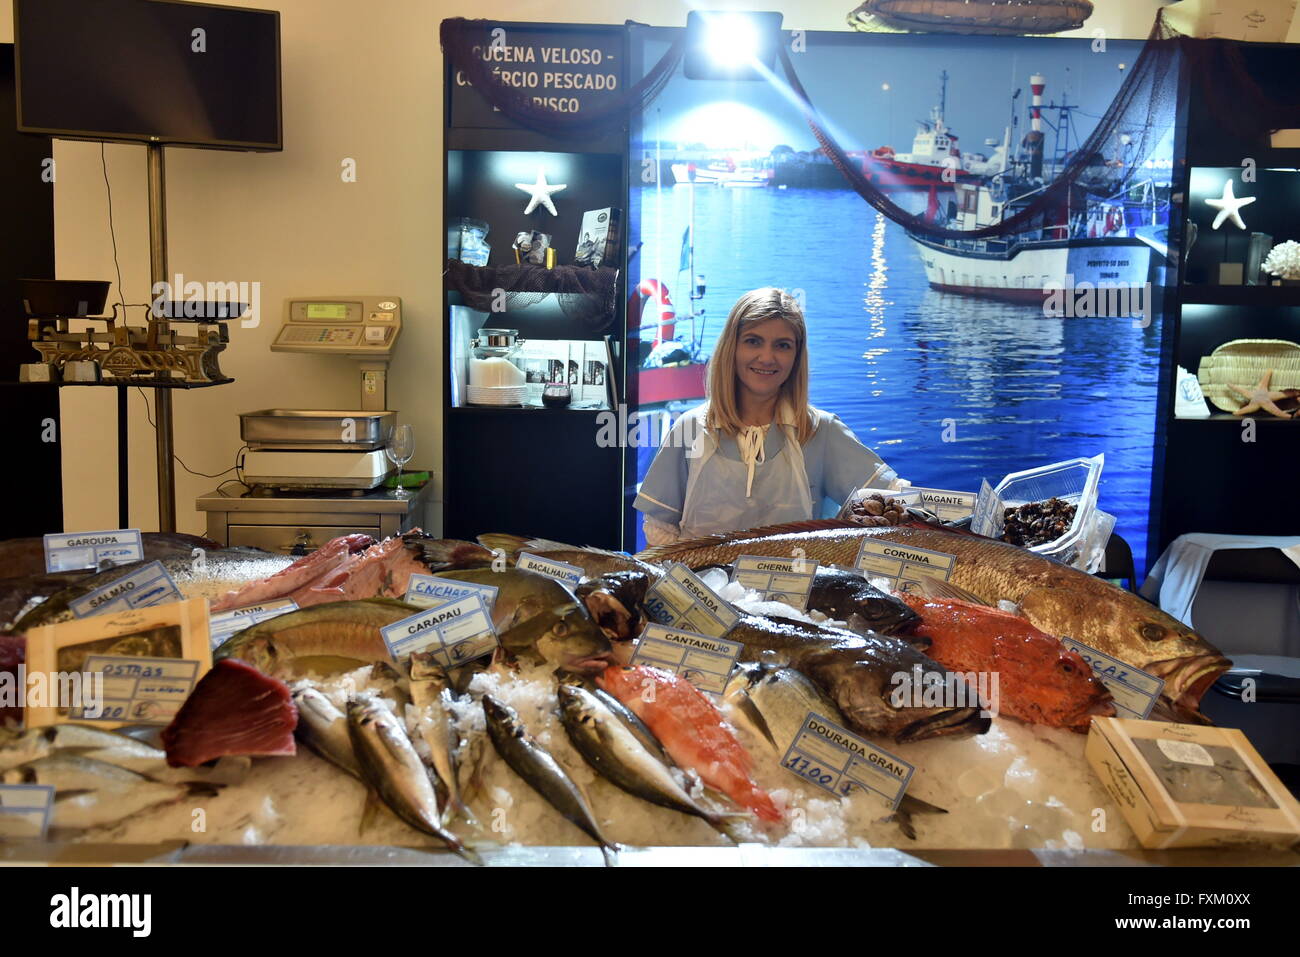 Lisbon, Portugal. 16th Apr, 2016. A seller stands behind a seafood stand at the Fish and Flavours foodie event in Lisbon, Portugal, April 16, 2016. The 9th edition of Fish and Flavours foodie event kicked off here on April 7, 2016, with a number of internationally renowned chefs participating. The event will end on April 17. © Zhang Liyun/Xinhua/Alamy Live News Stock Photo